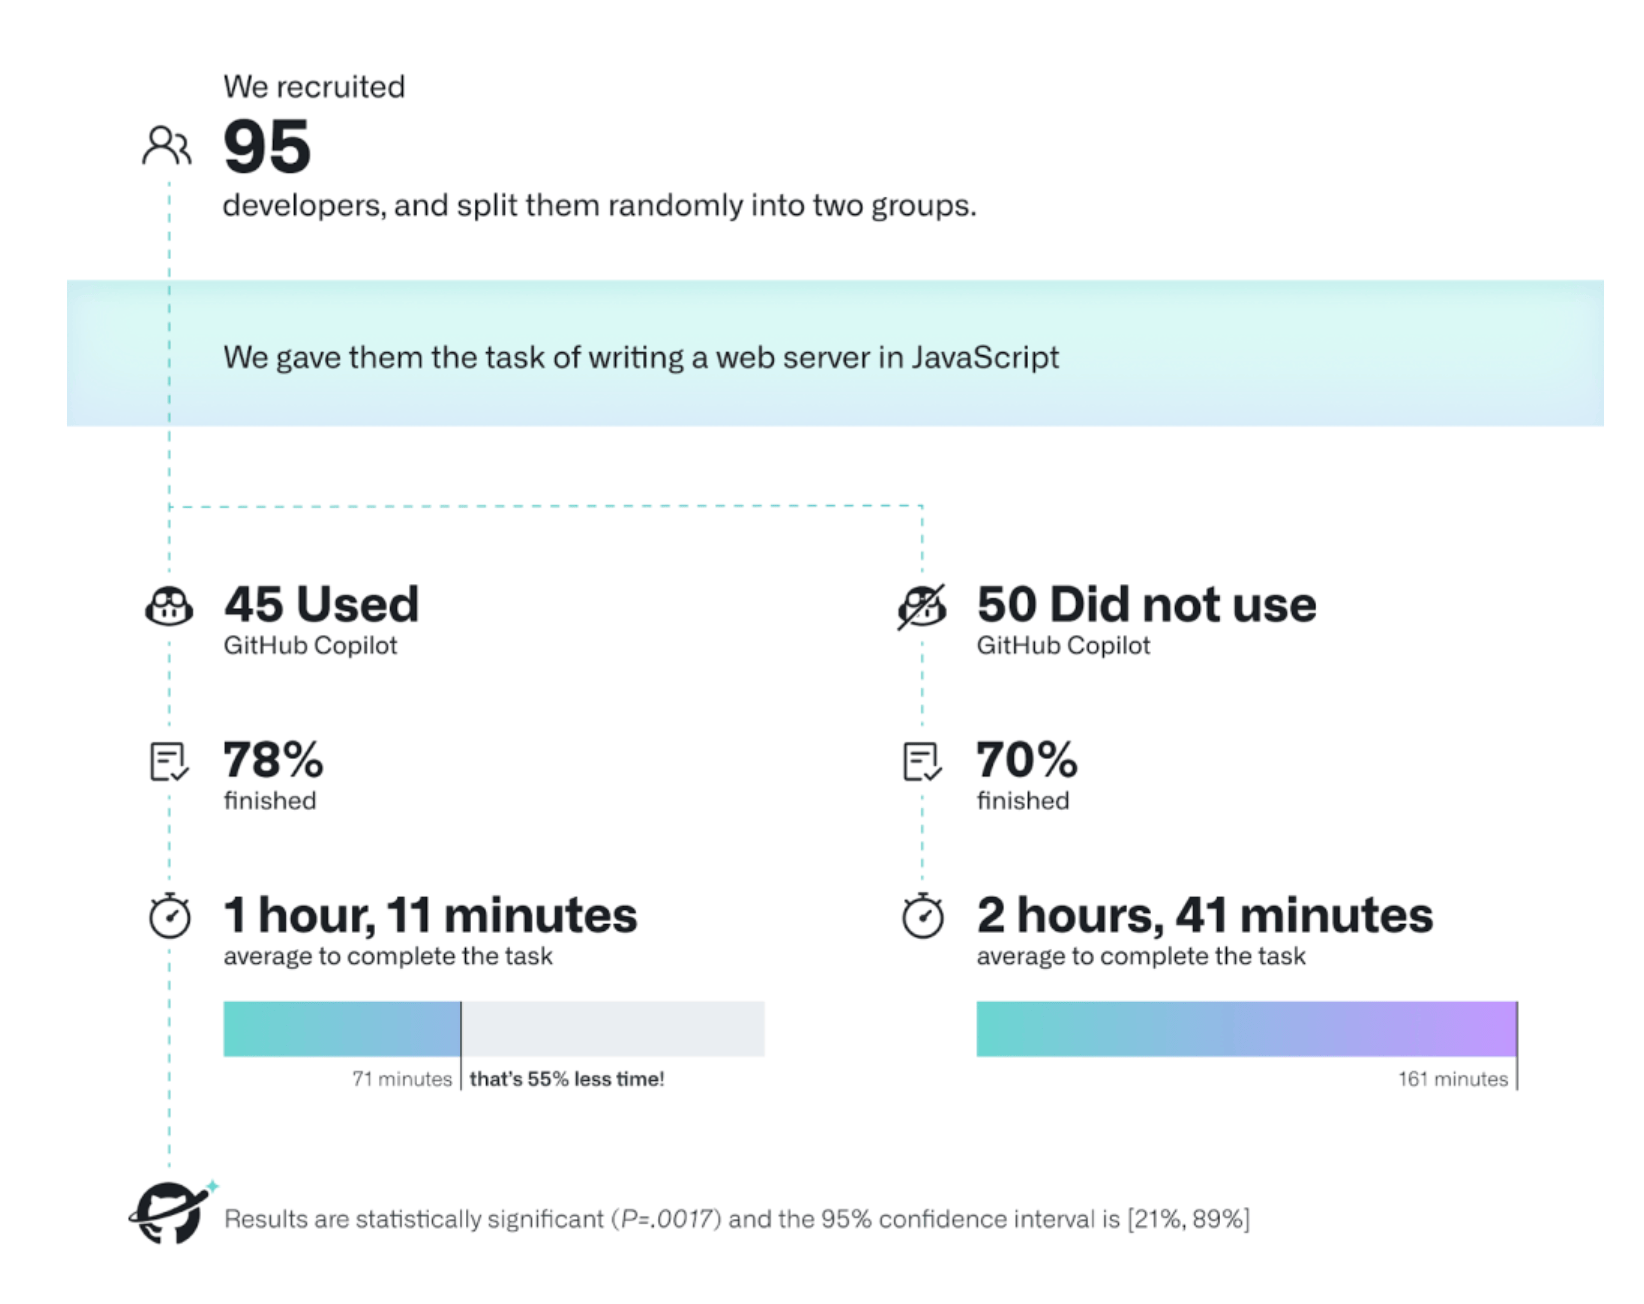 NextJS is used by 9% of people